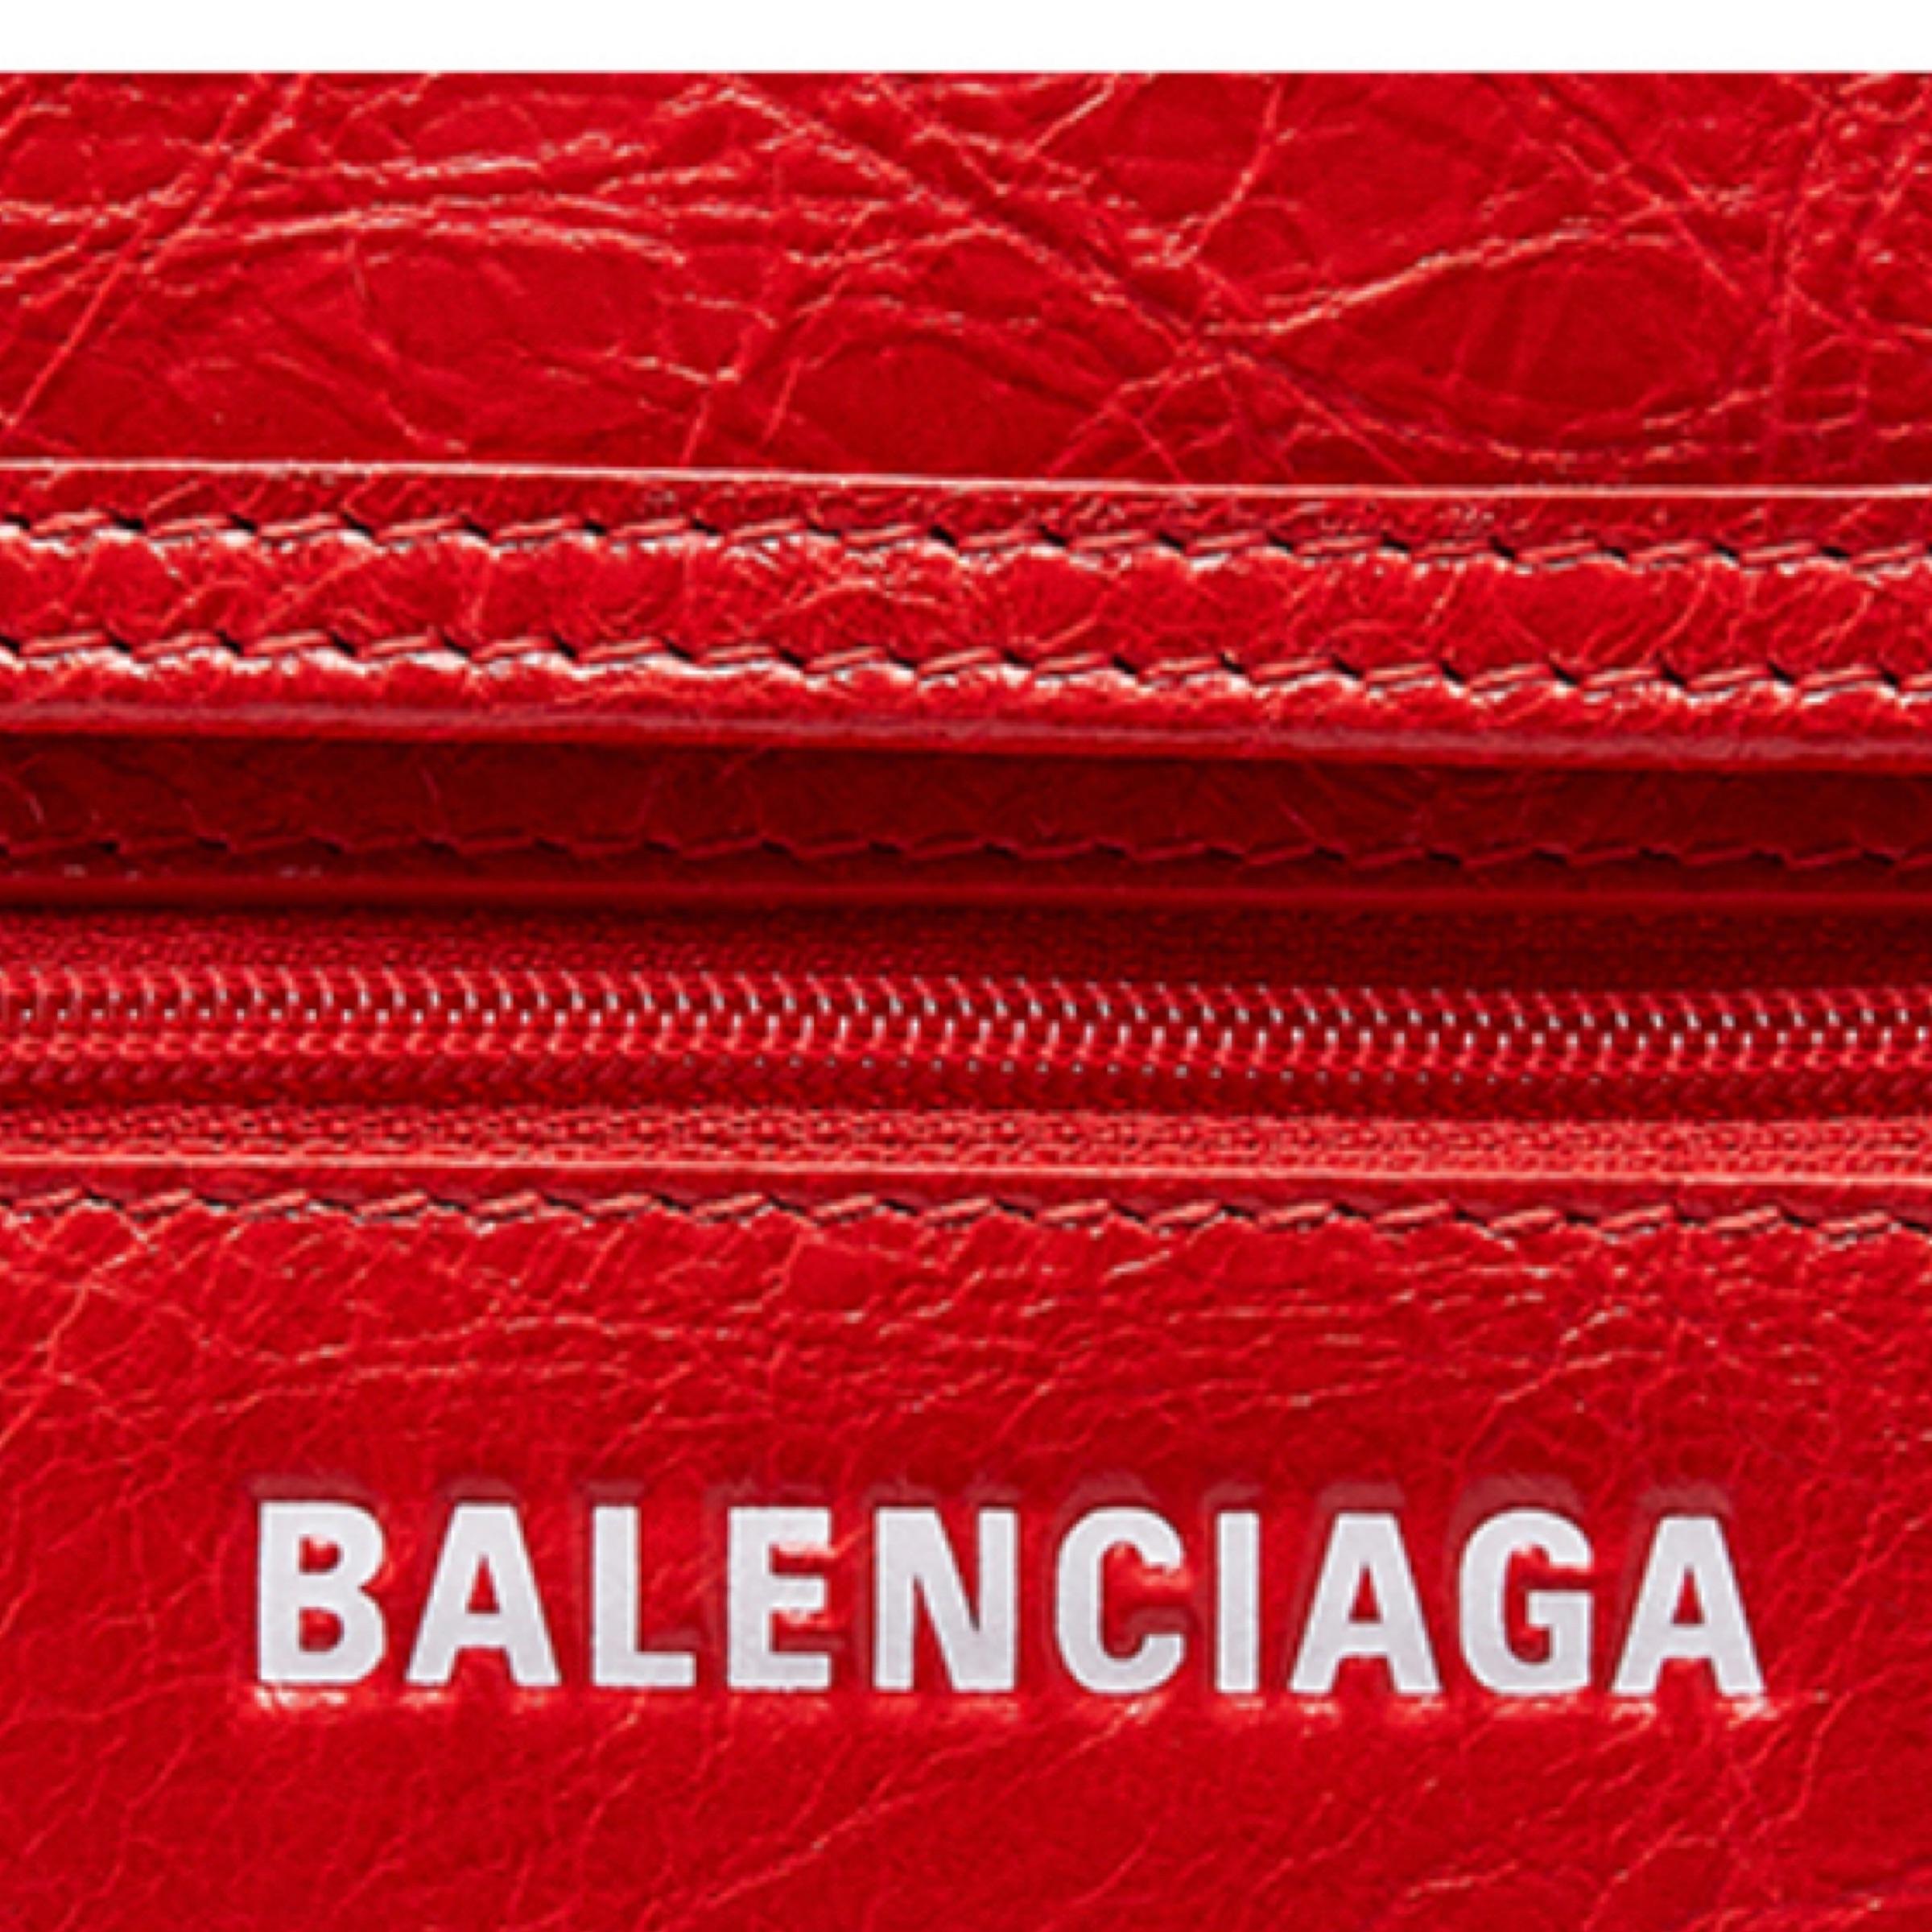 NEW Balenciaga Red Explorer Cracked Leather Pouch Crossbody Bag For Sale 10